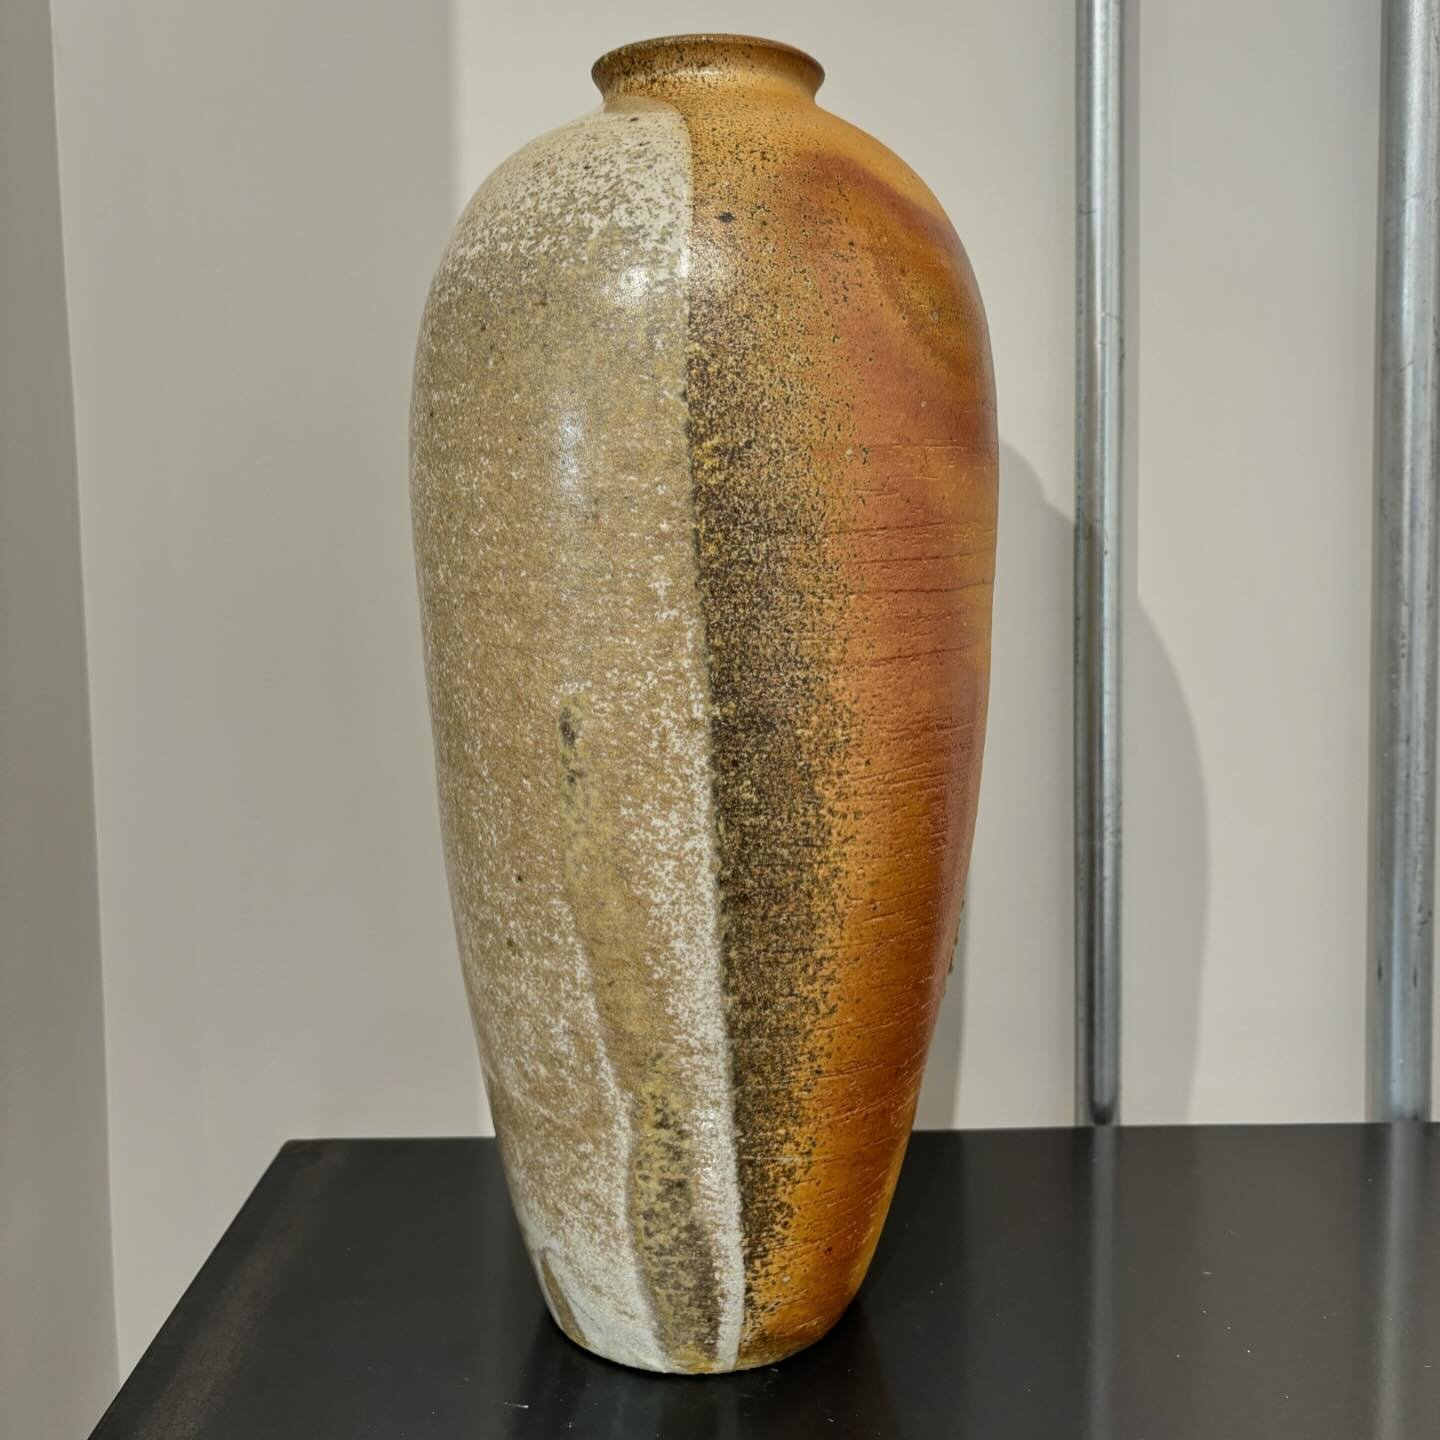 &lsquo;Standing Tall&rsquo; by Gemma Smale. This beautiful piece was wood fired for 3 days in a traditional Japanese anagama kiln, decorated by the flame, with a white shino glaze layered on top. Contact us for more details - we are open today until 